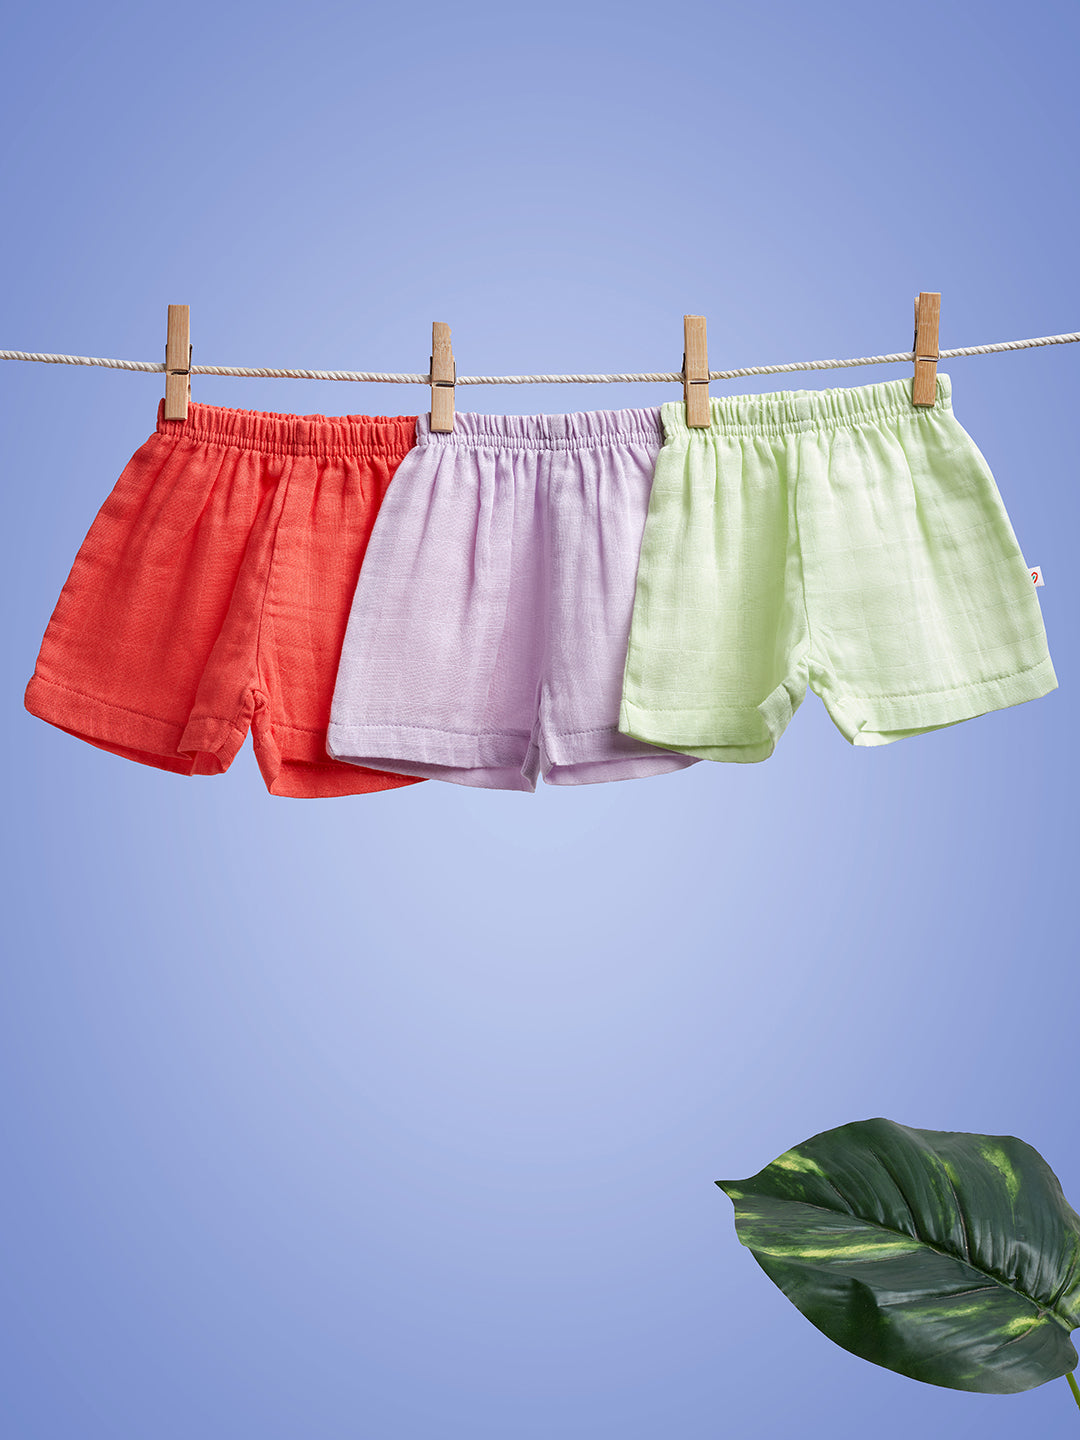 Nuberry New Born Organic Cotton Muslin Shorts Set Pack of 3